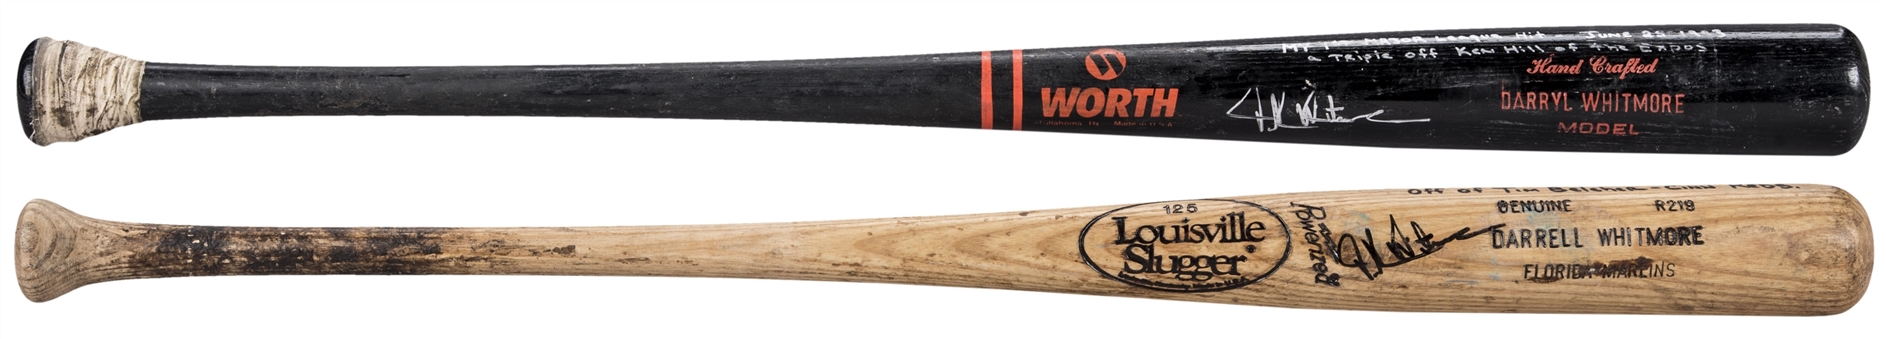 Lot of (2) 1993 Darrell Whitmore Game Used, Signed & Inscribed Bats For 1st MLB Hit & 1st Home Run (Whitmore LOA, PSA/DNA GU 10 & JSA)